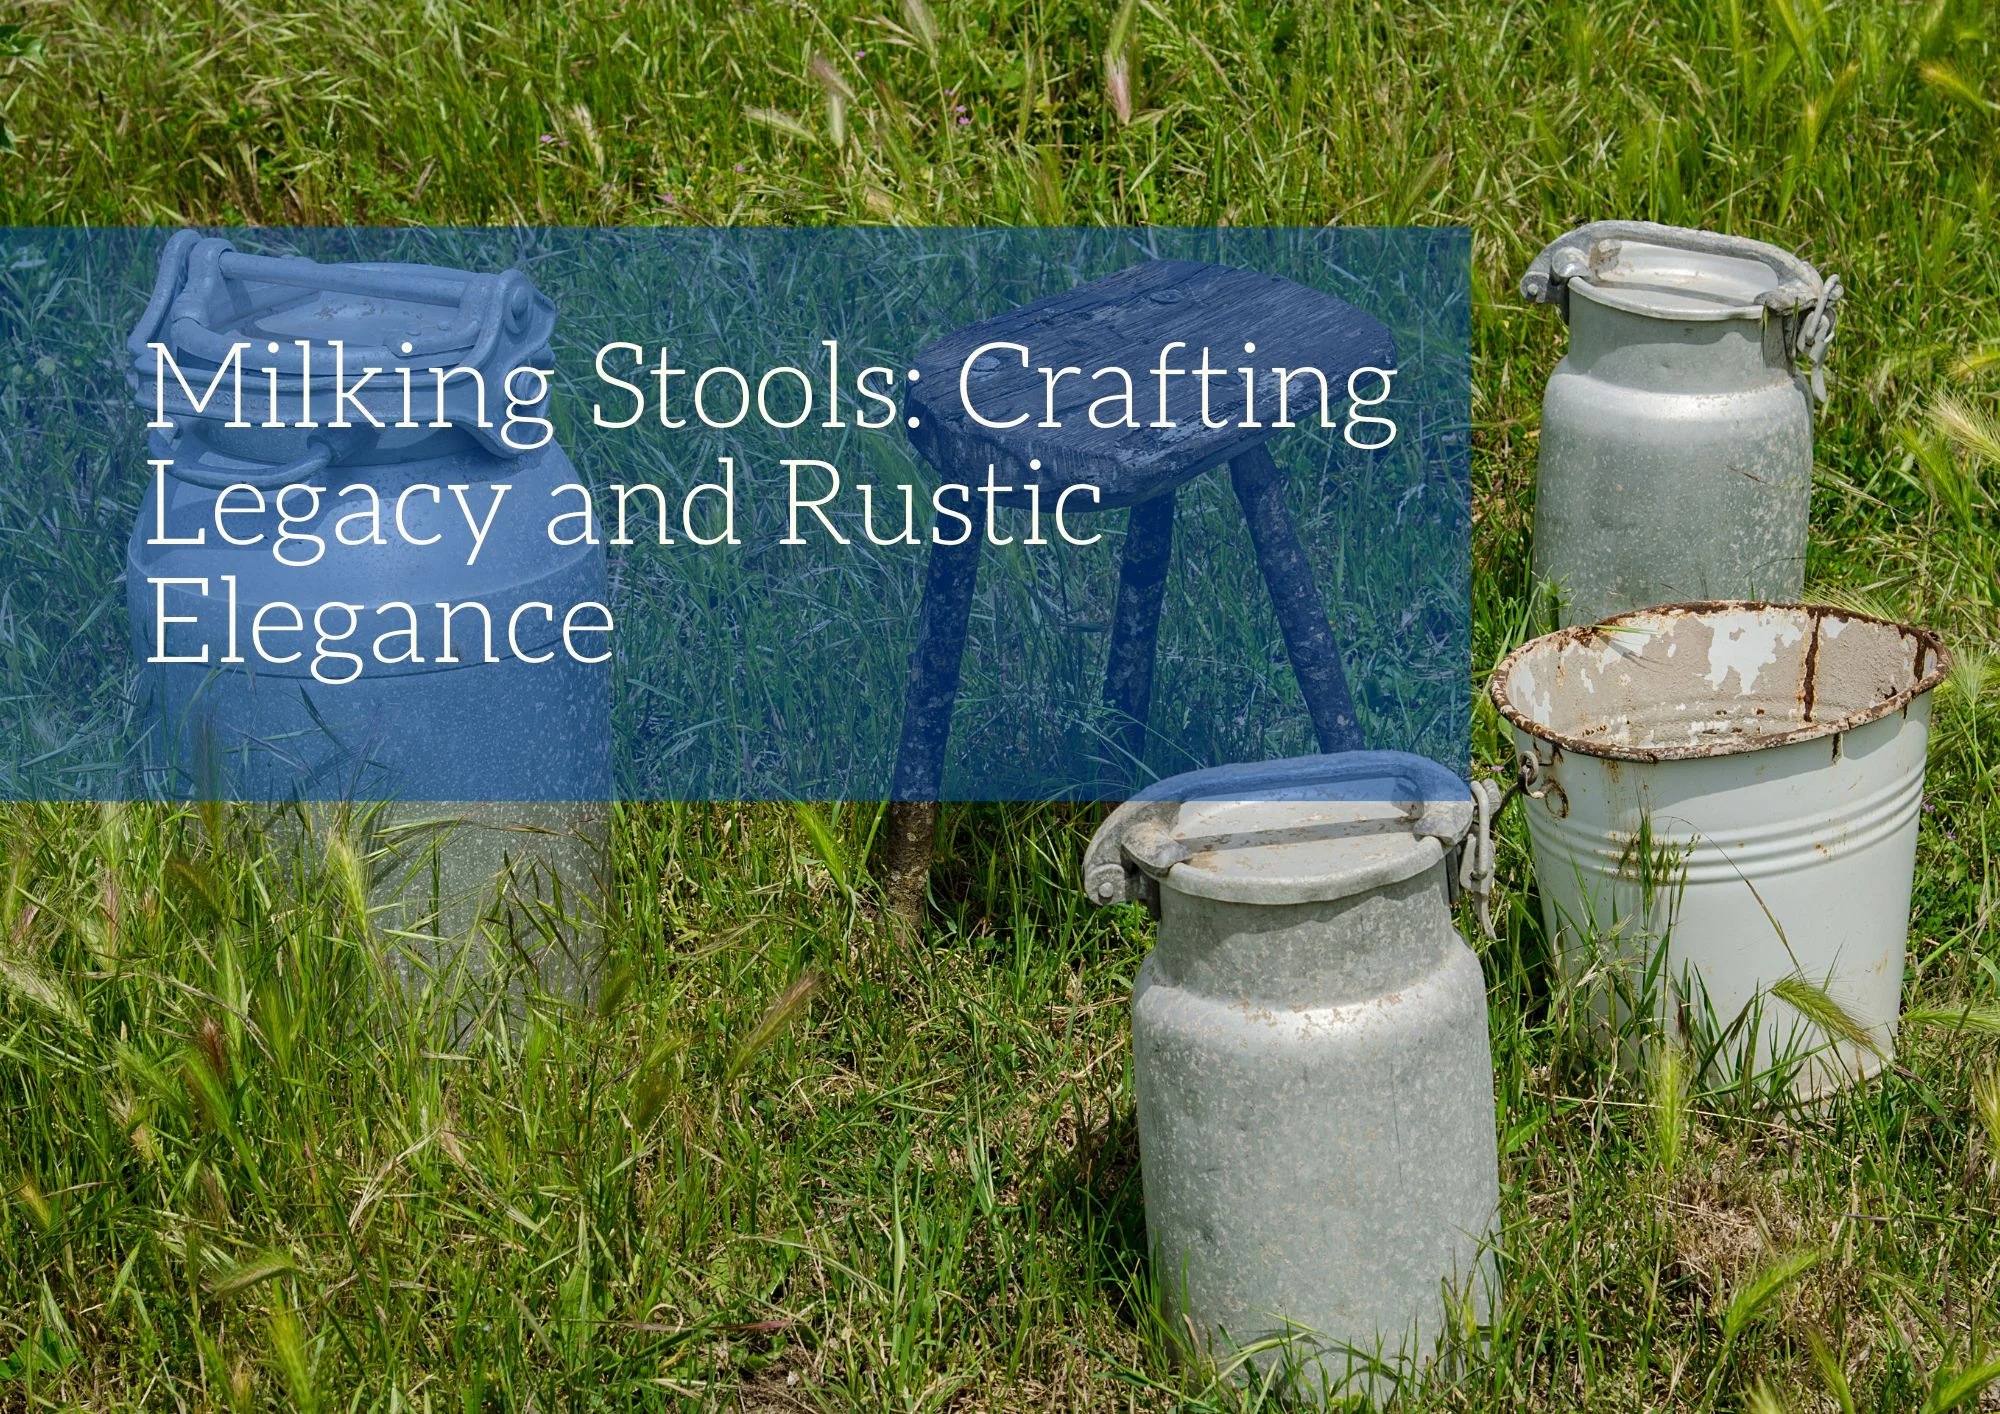 Milking Stools: Crafting Legacy and Rustic Elegance